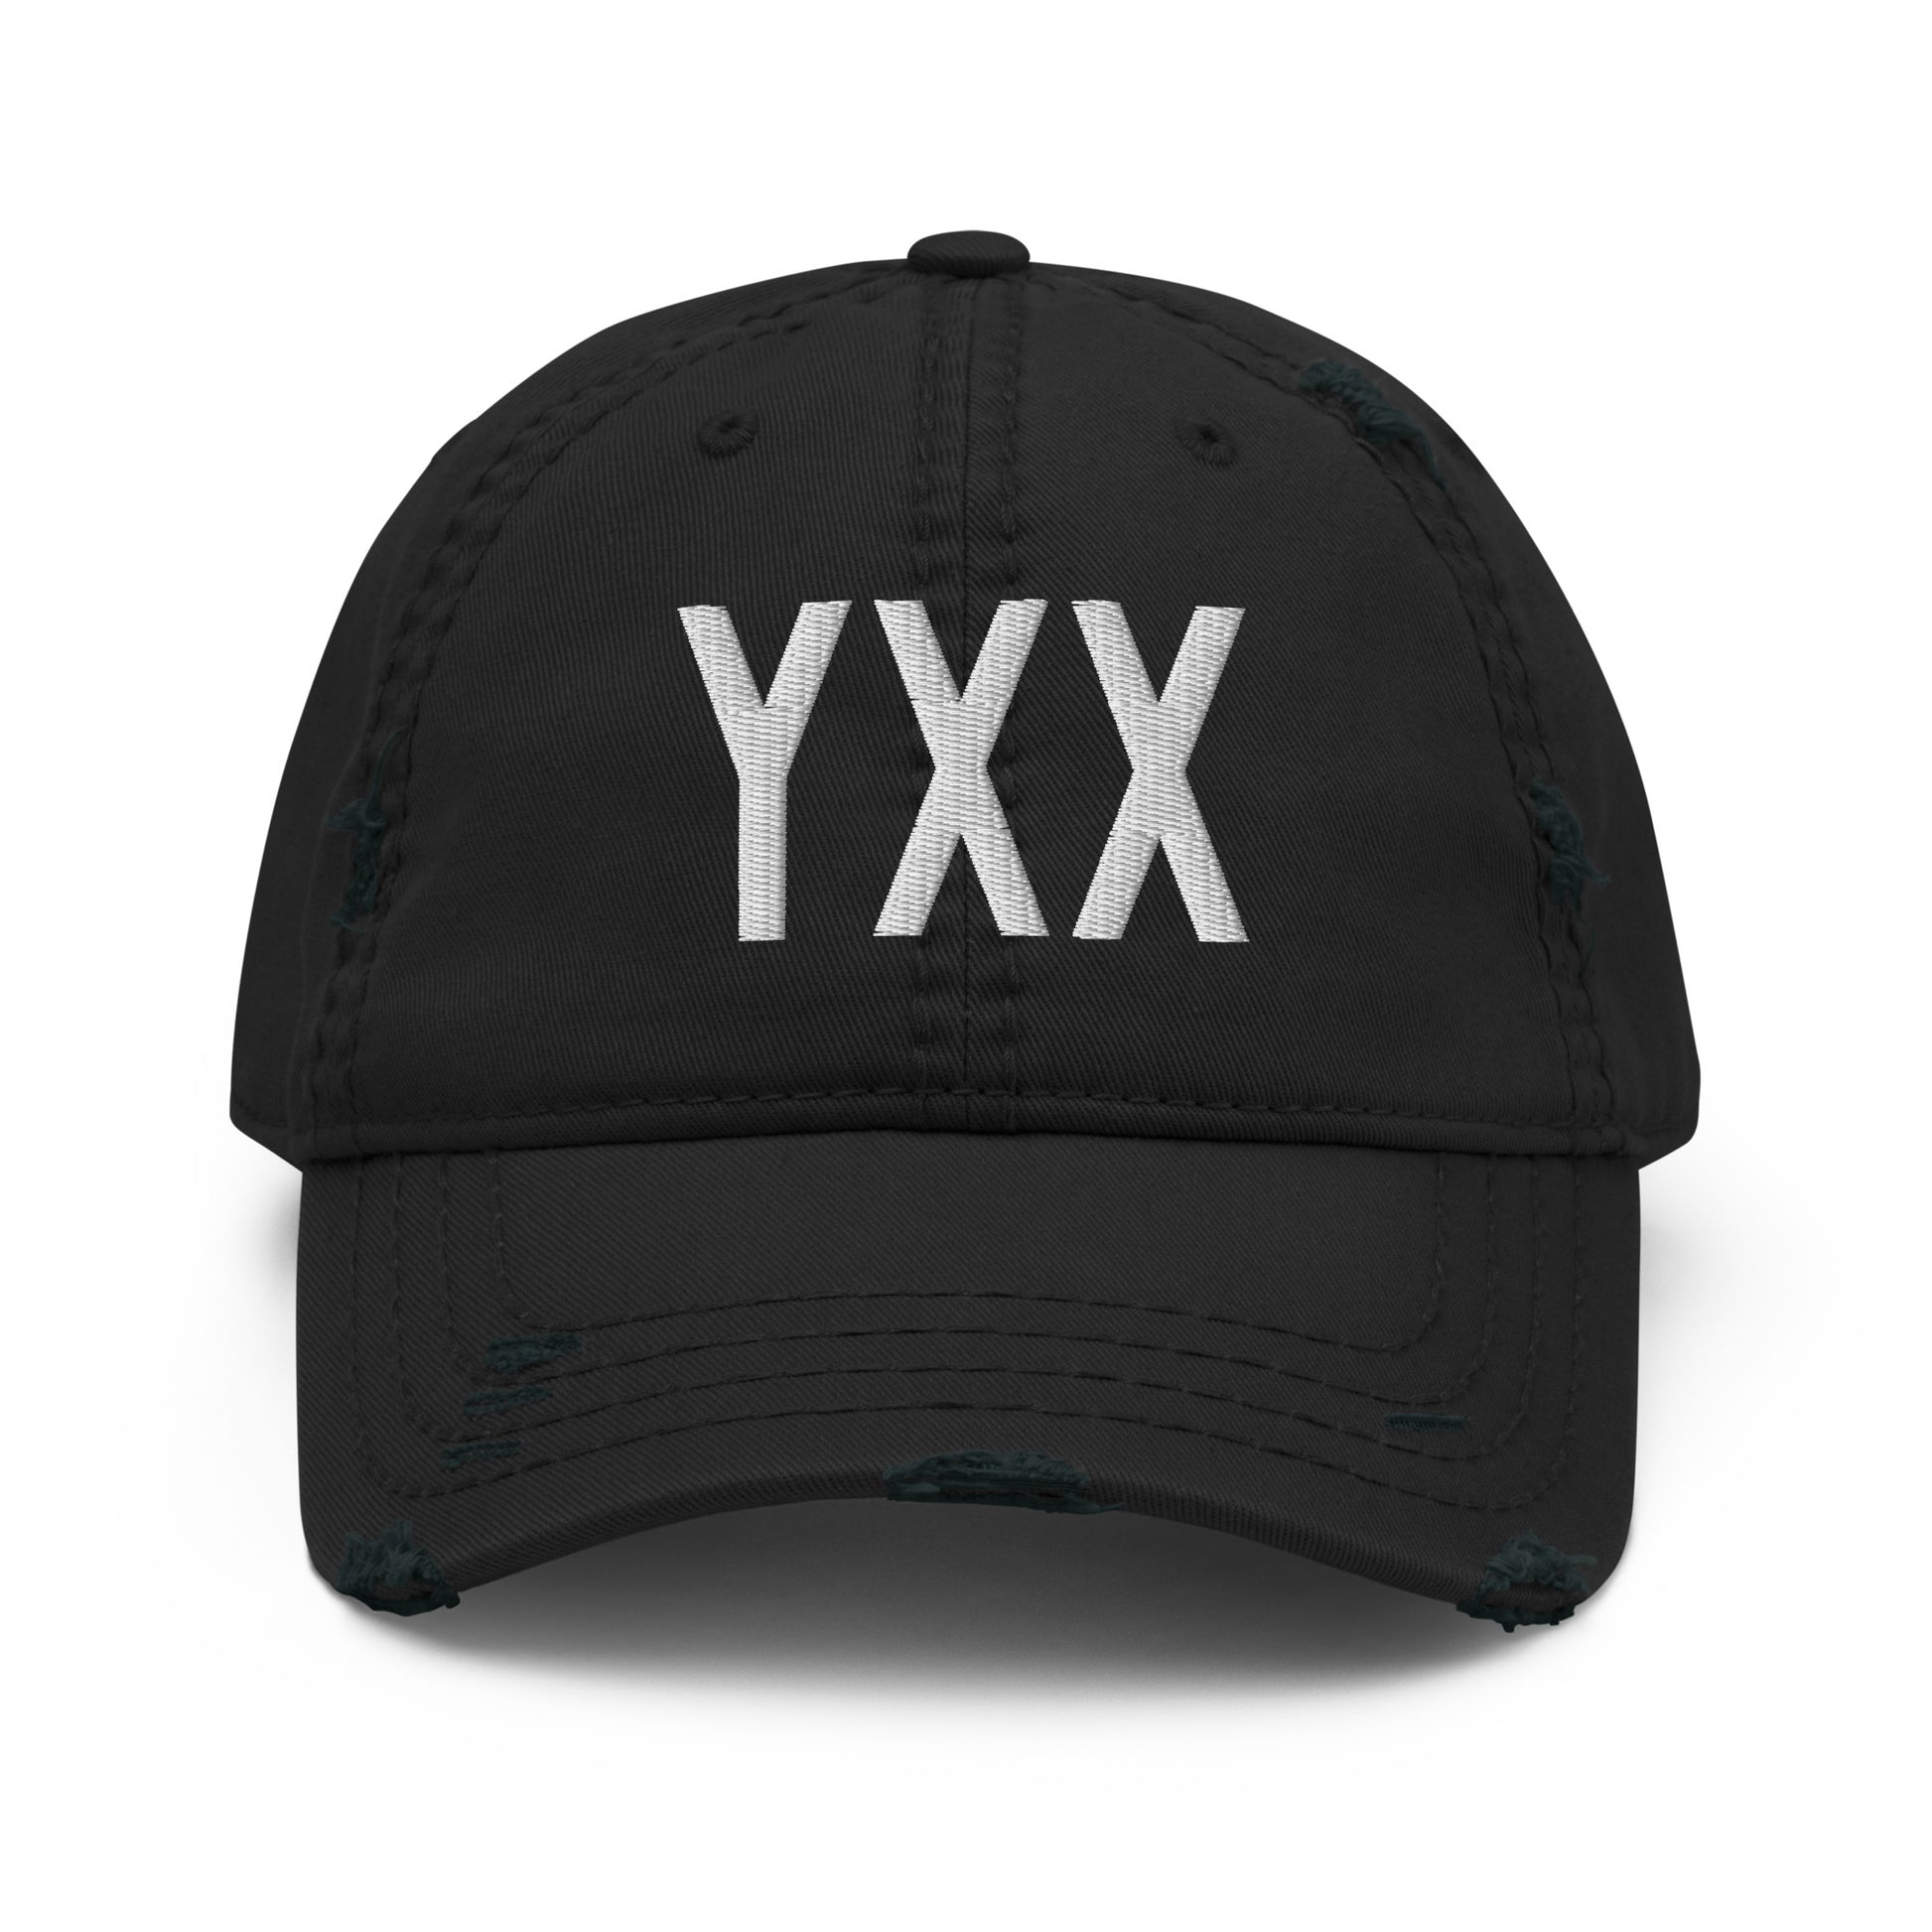 Airport Code Distressed Hat - White • YXX Abbotsford • YHM Designs - Image 10